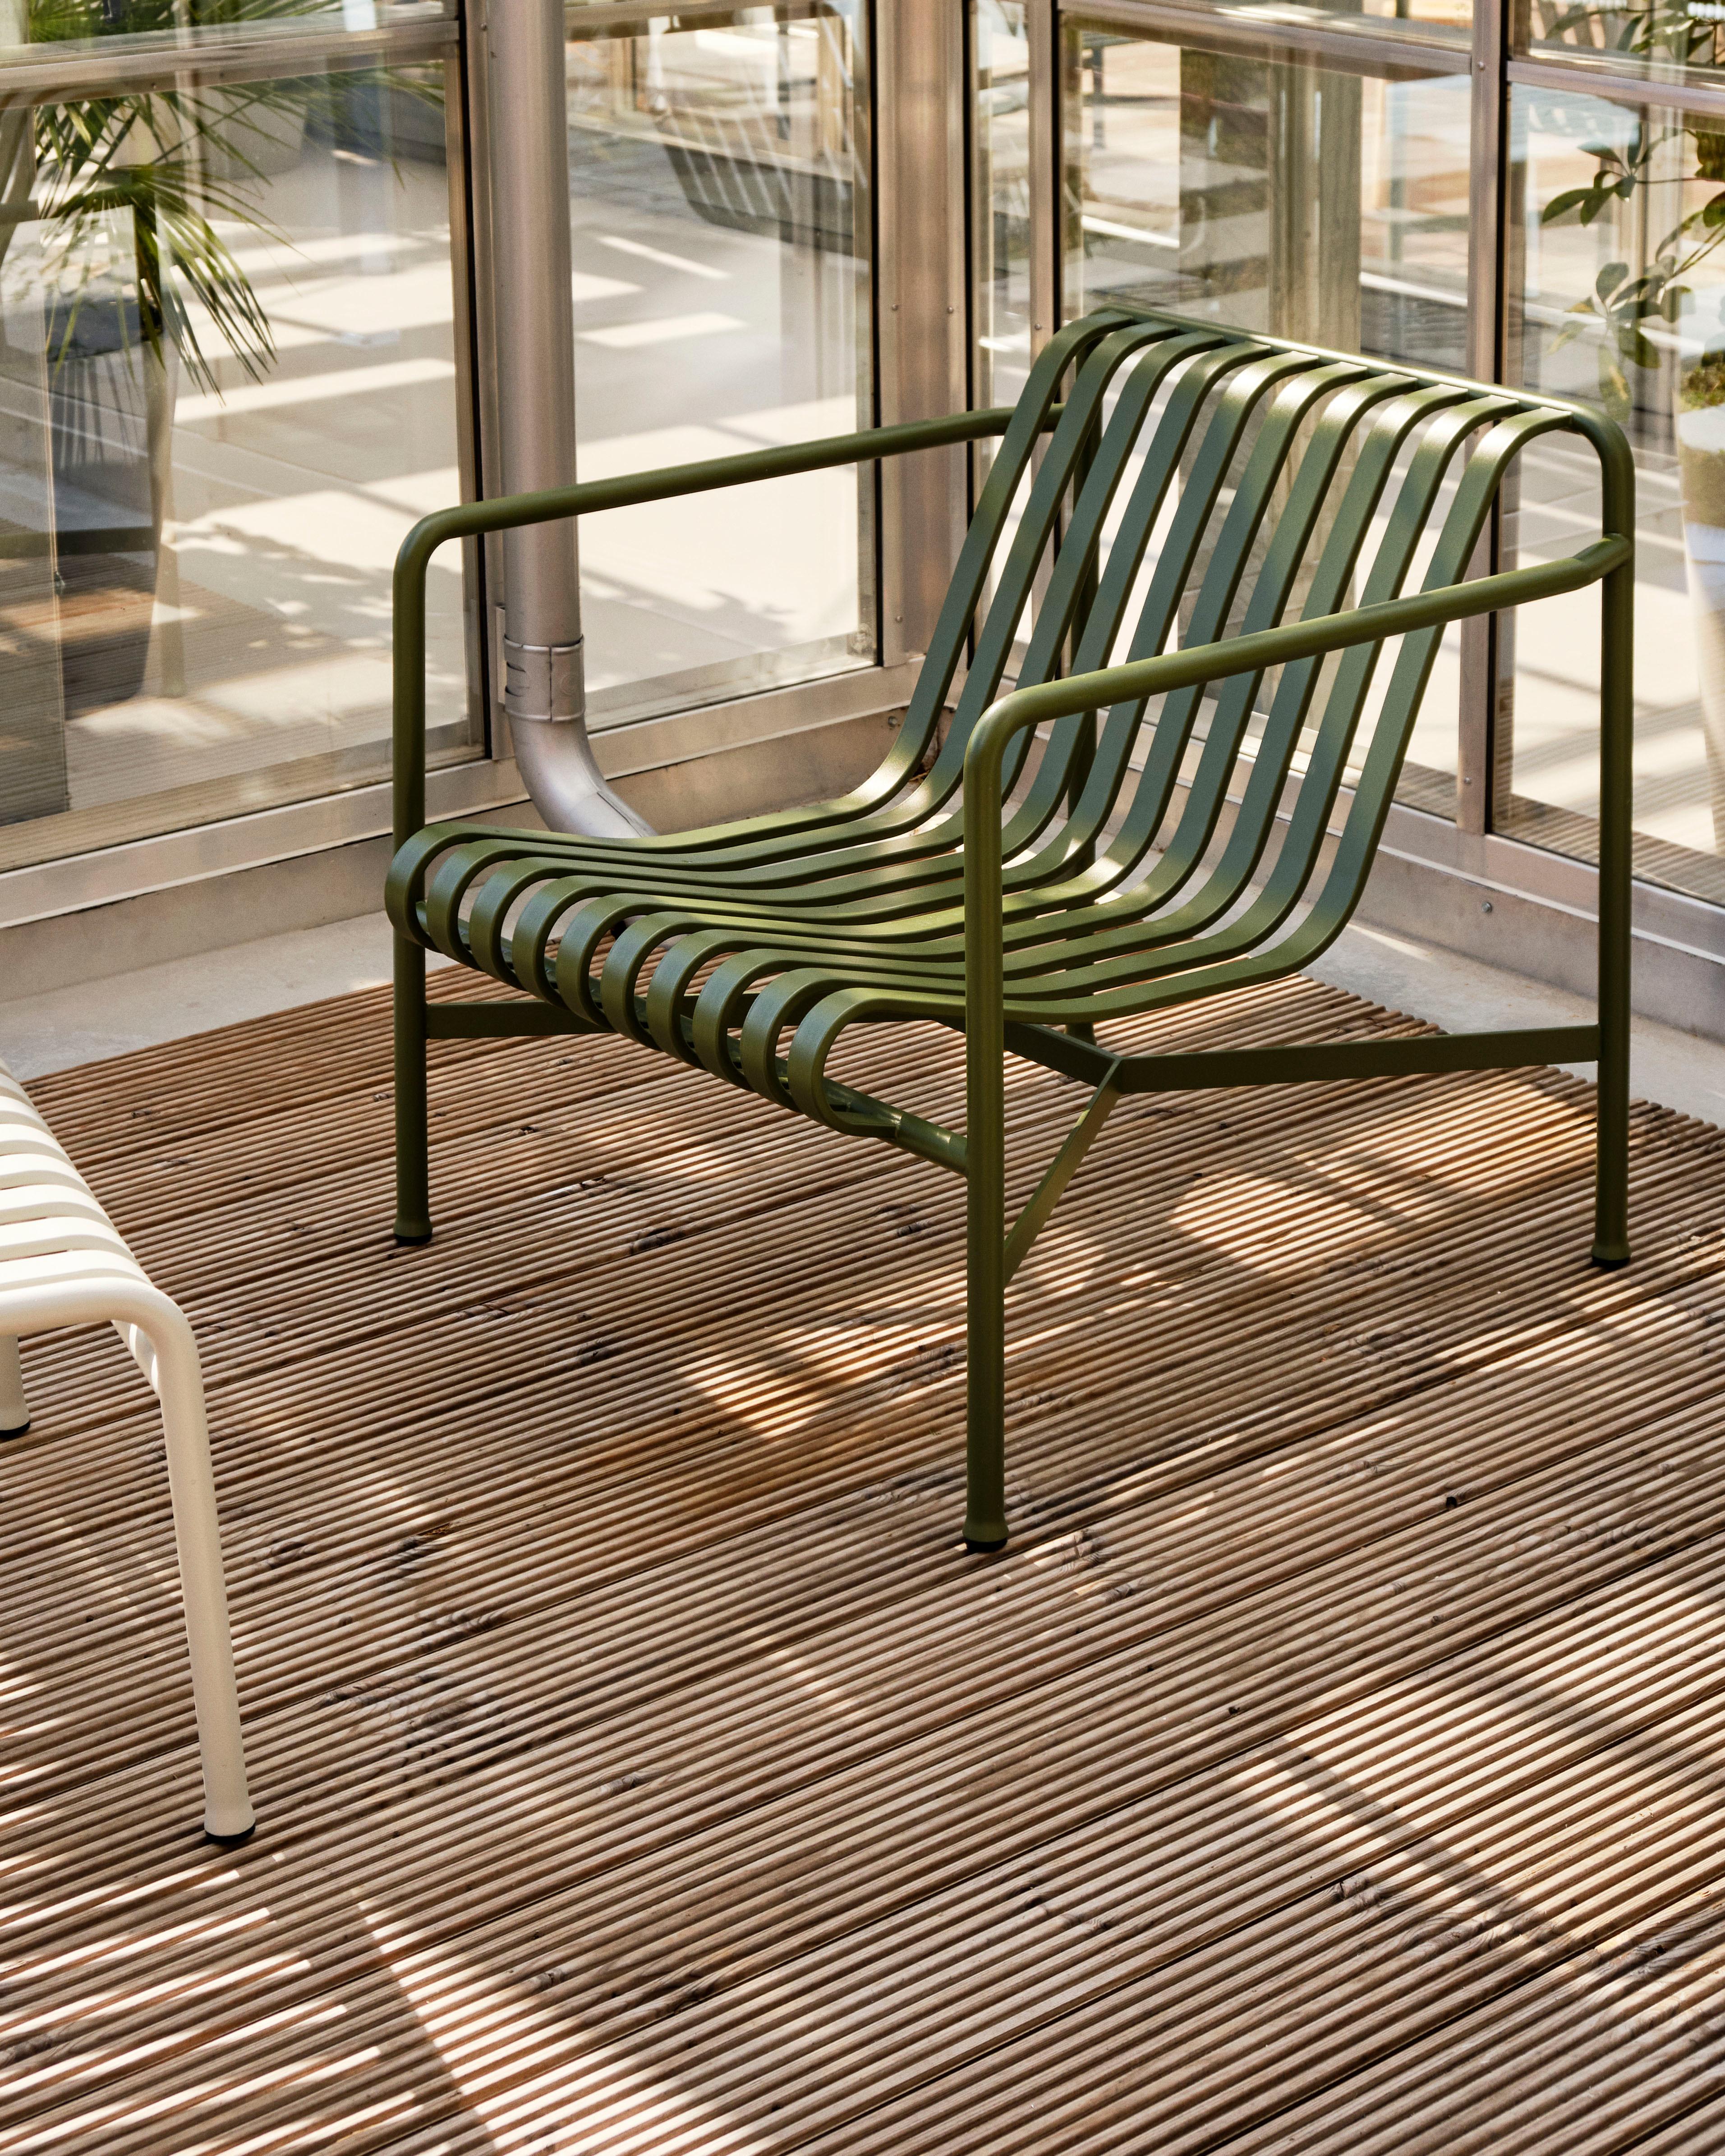 Powder-Coated Set of Palissade Lounge Chairs & Ottoman Olive by Ronan/Erwan Bouroullec for Hay For Sale